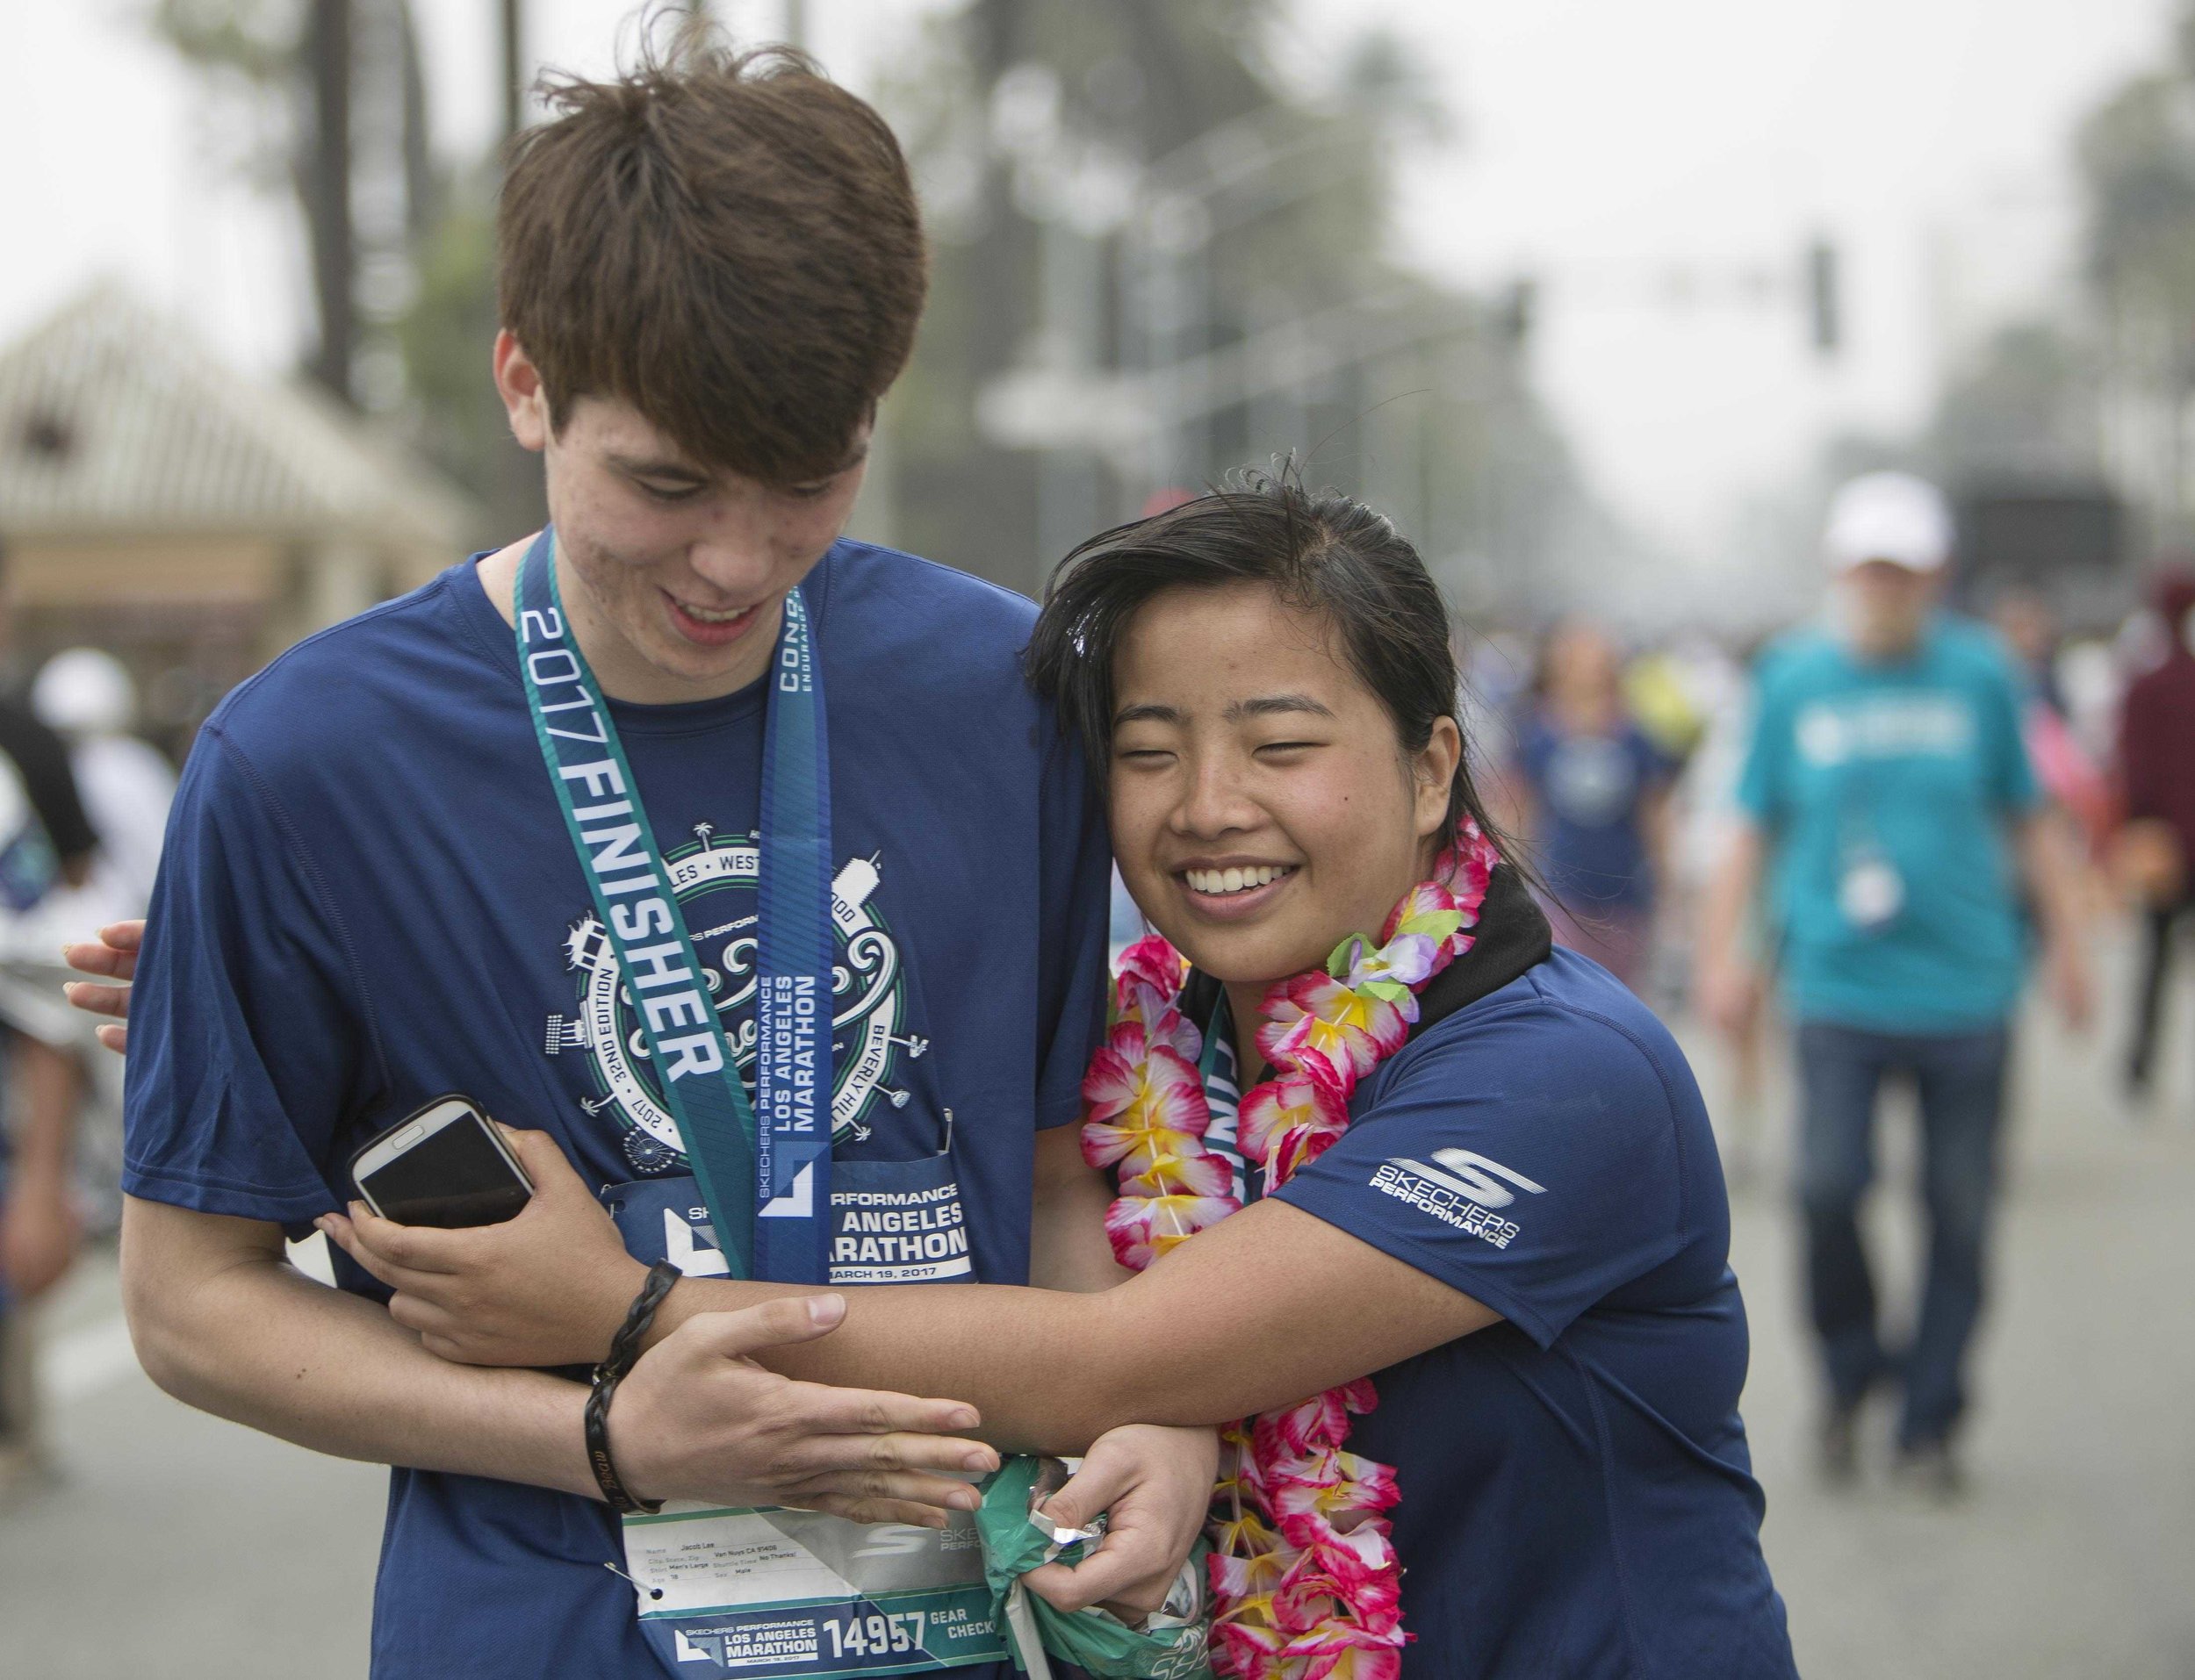  March 19, 2017. Kathy Pho (right) completes the 2017 LA Marathon and embraces her childhood friend Jacob Lee (left) who ran The LA Marathon along side her. Kathy Pho finished the marathon in five hours fourty nine minutes fifty four seconds. Santa M